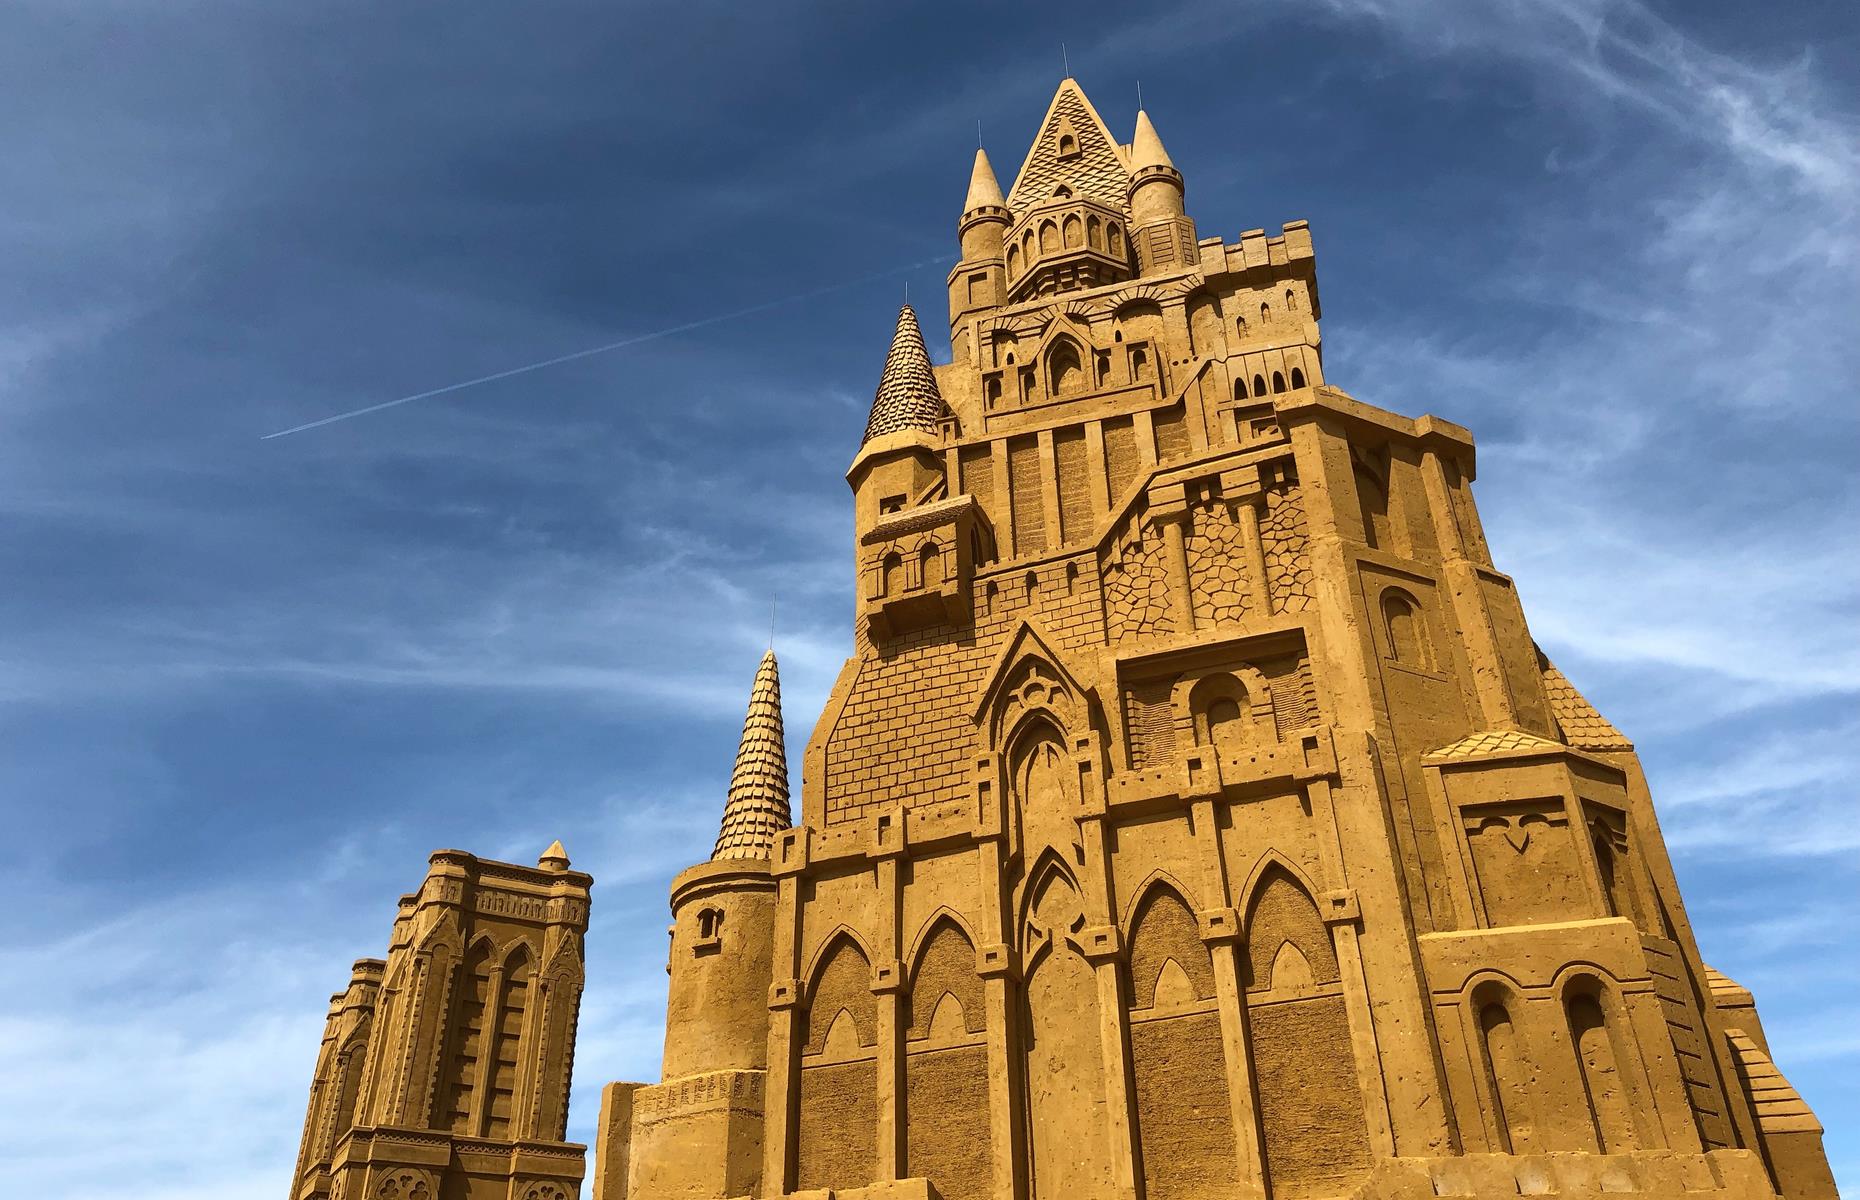 This architectural masterpiece was part of the annual Belgium Sand Sculpture Festival in 2019, which takes place on the beach of Ostend. Working under a theme of “dreams”, international sand artists converged at the annual event to create fantasy worlds using sand and water alone. There were 150 works on the beach, which ranged from just over six feet (2m) to 20 feet (6m) in height.